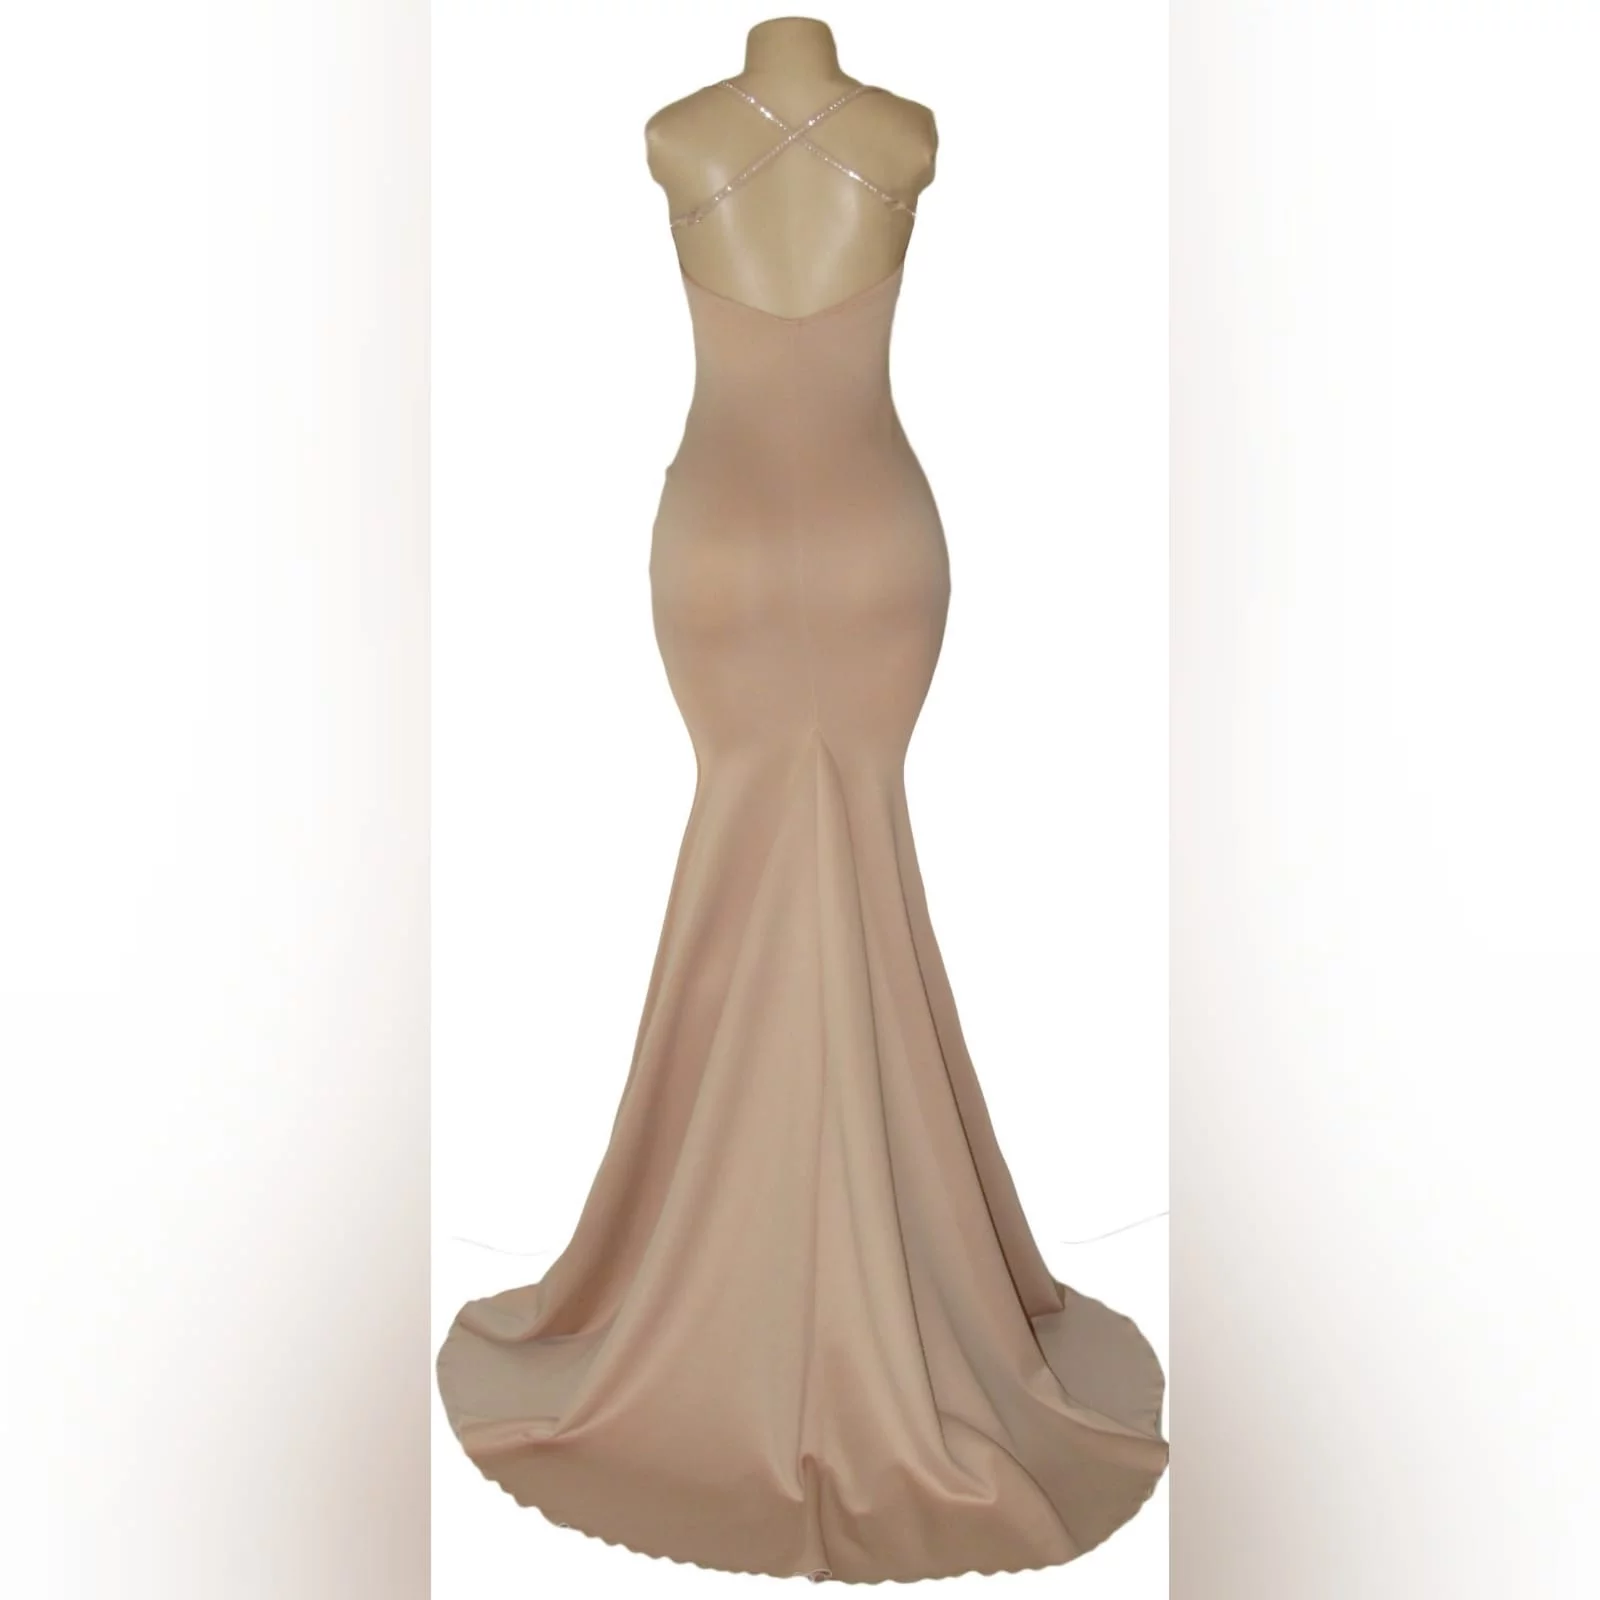 Nude simple mermaid prom dress 5 nude simple mermaid prom dress with a sweetheart neckline, open back, thin shoulder straps crossed at the back and detailed with diamante. Dress with a train.